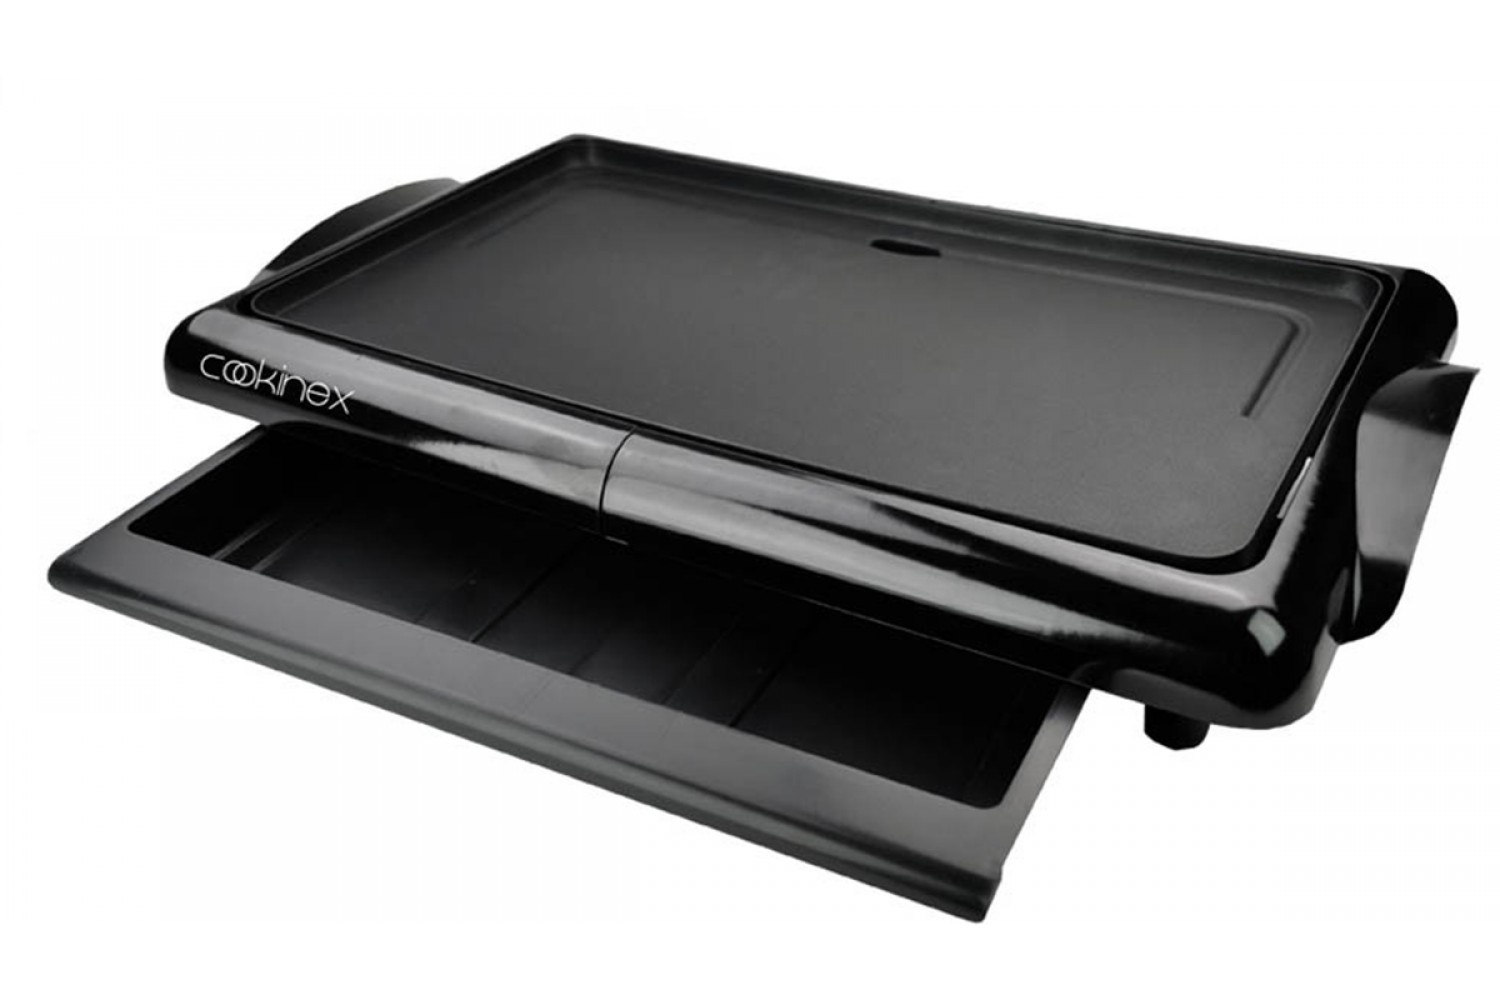 20 Inch Electric Griddle with 1400w Power